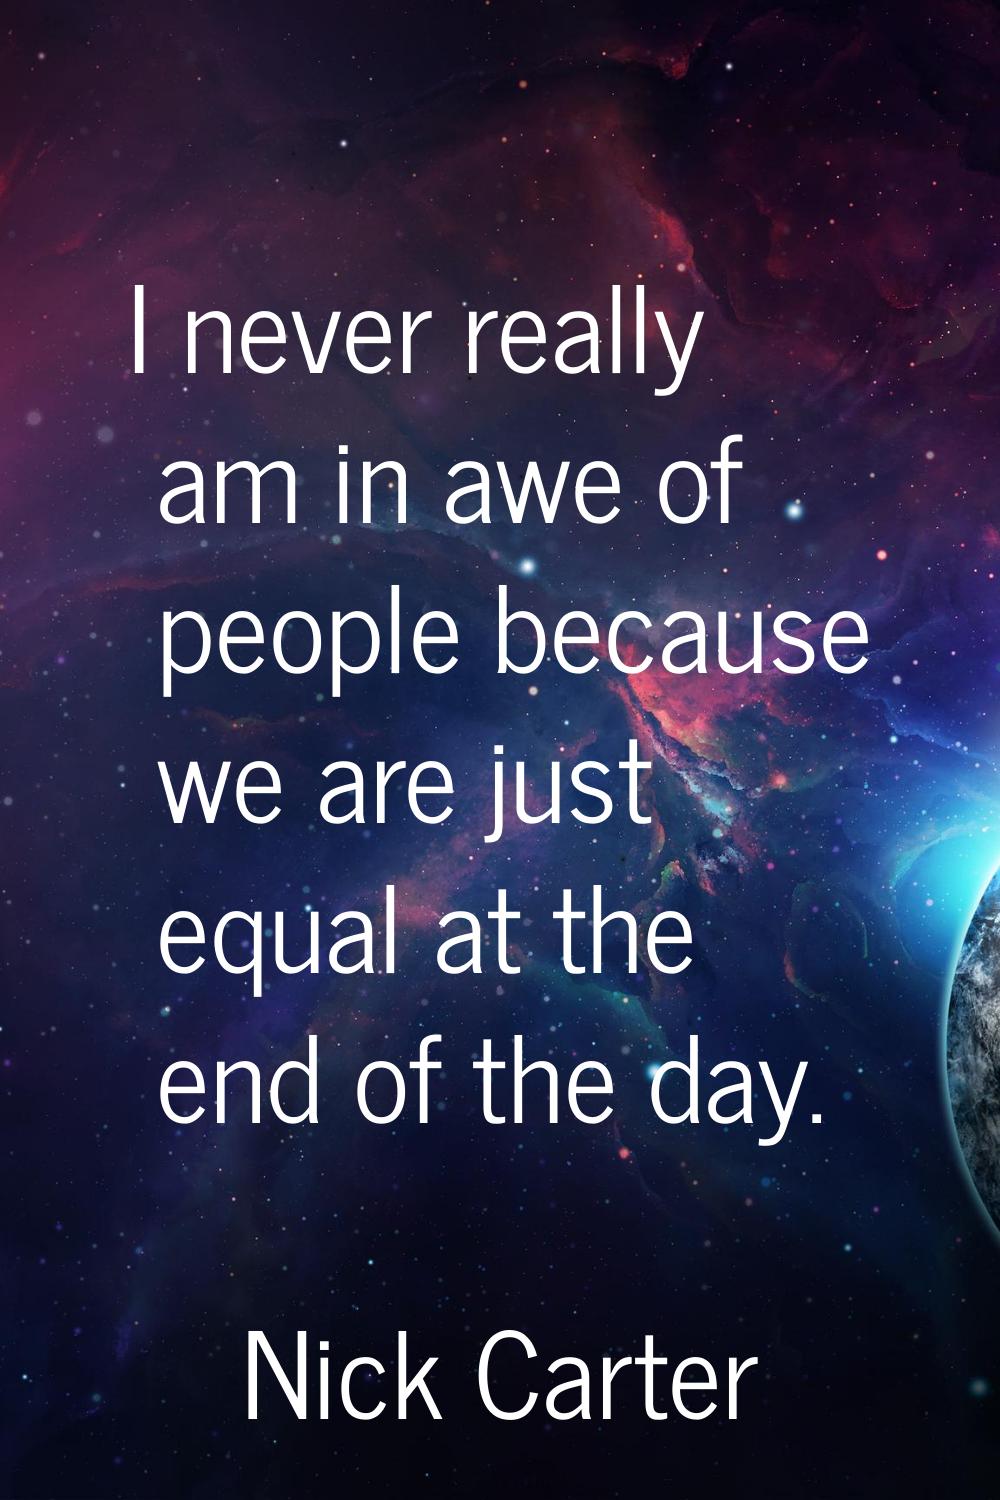 I never really am in awe of people because we are just equal at the end of the day.